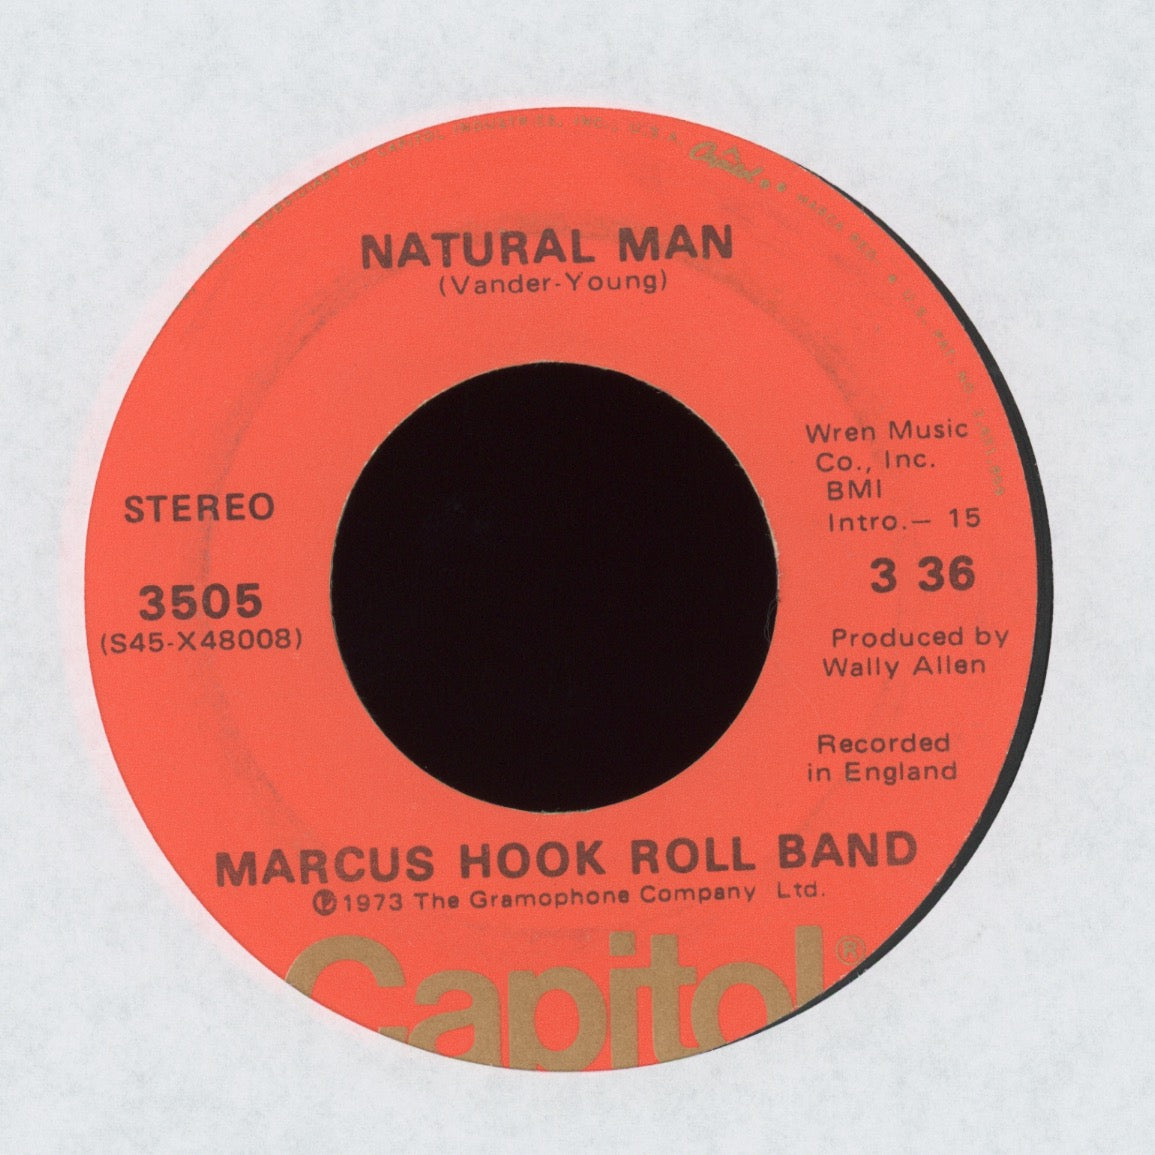 Marcus Hook Roll Band - Natural Man on Capitol Angus Young